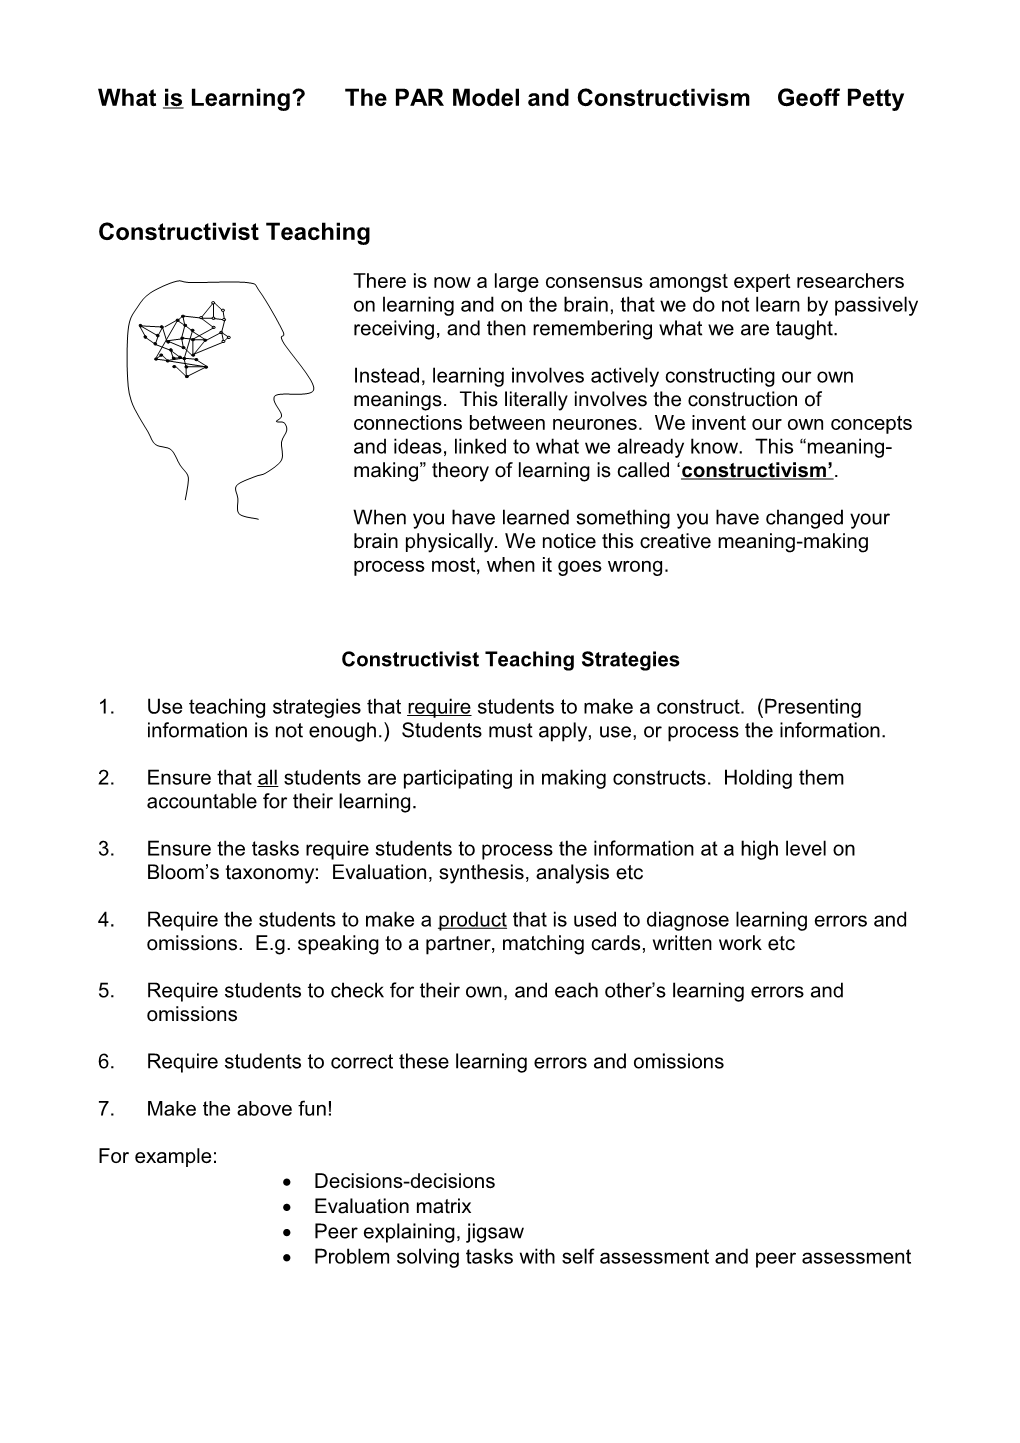 What Is Learning? the PAR Model and Constructivism Geoff Petty